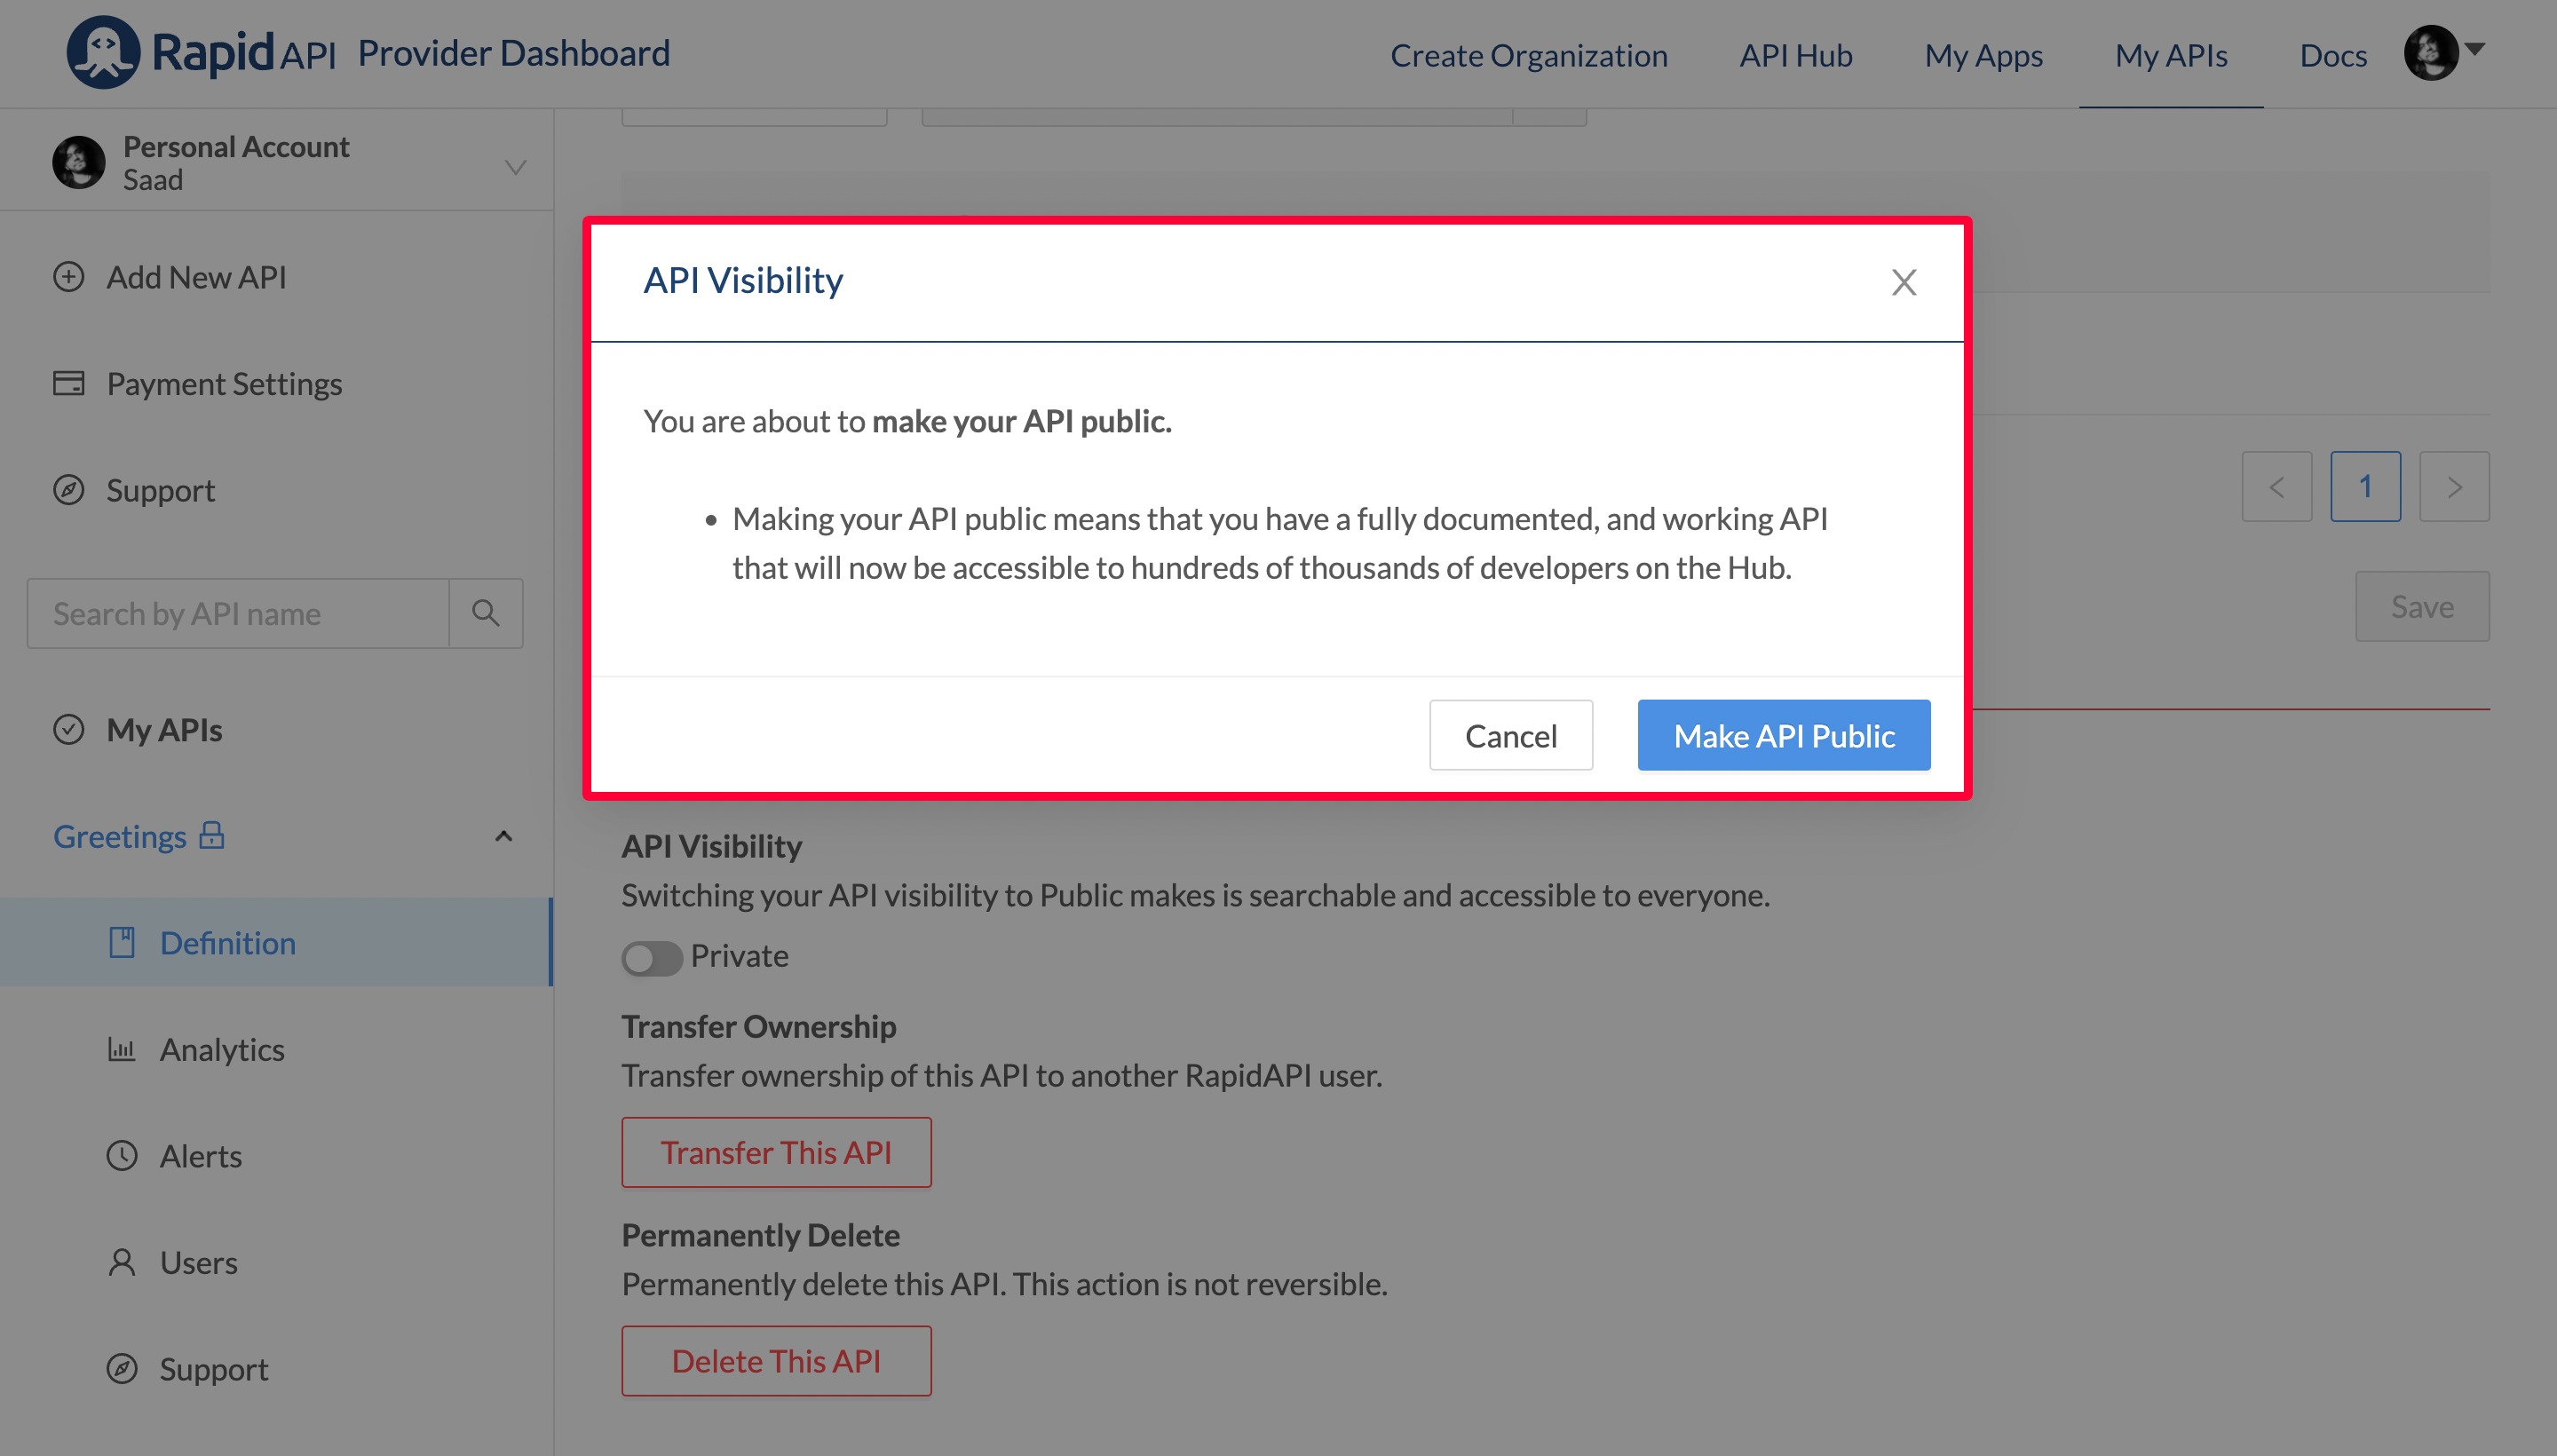 Changing The Visibility Status of the API